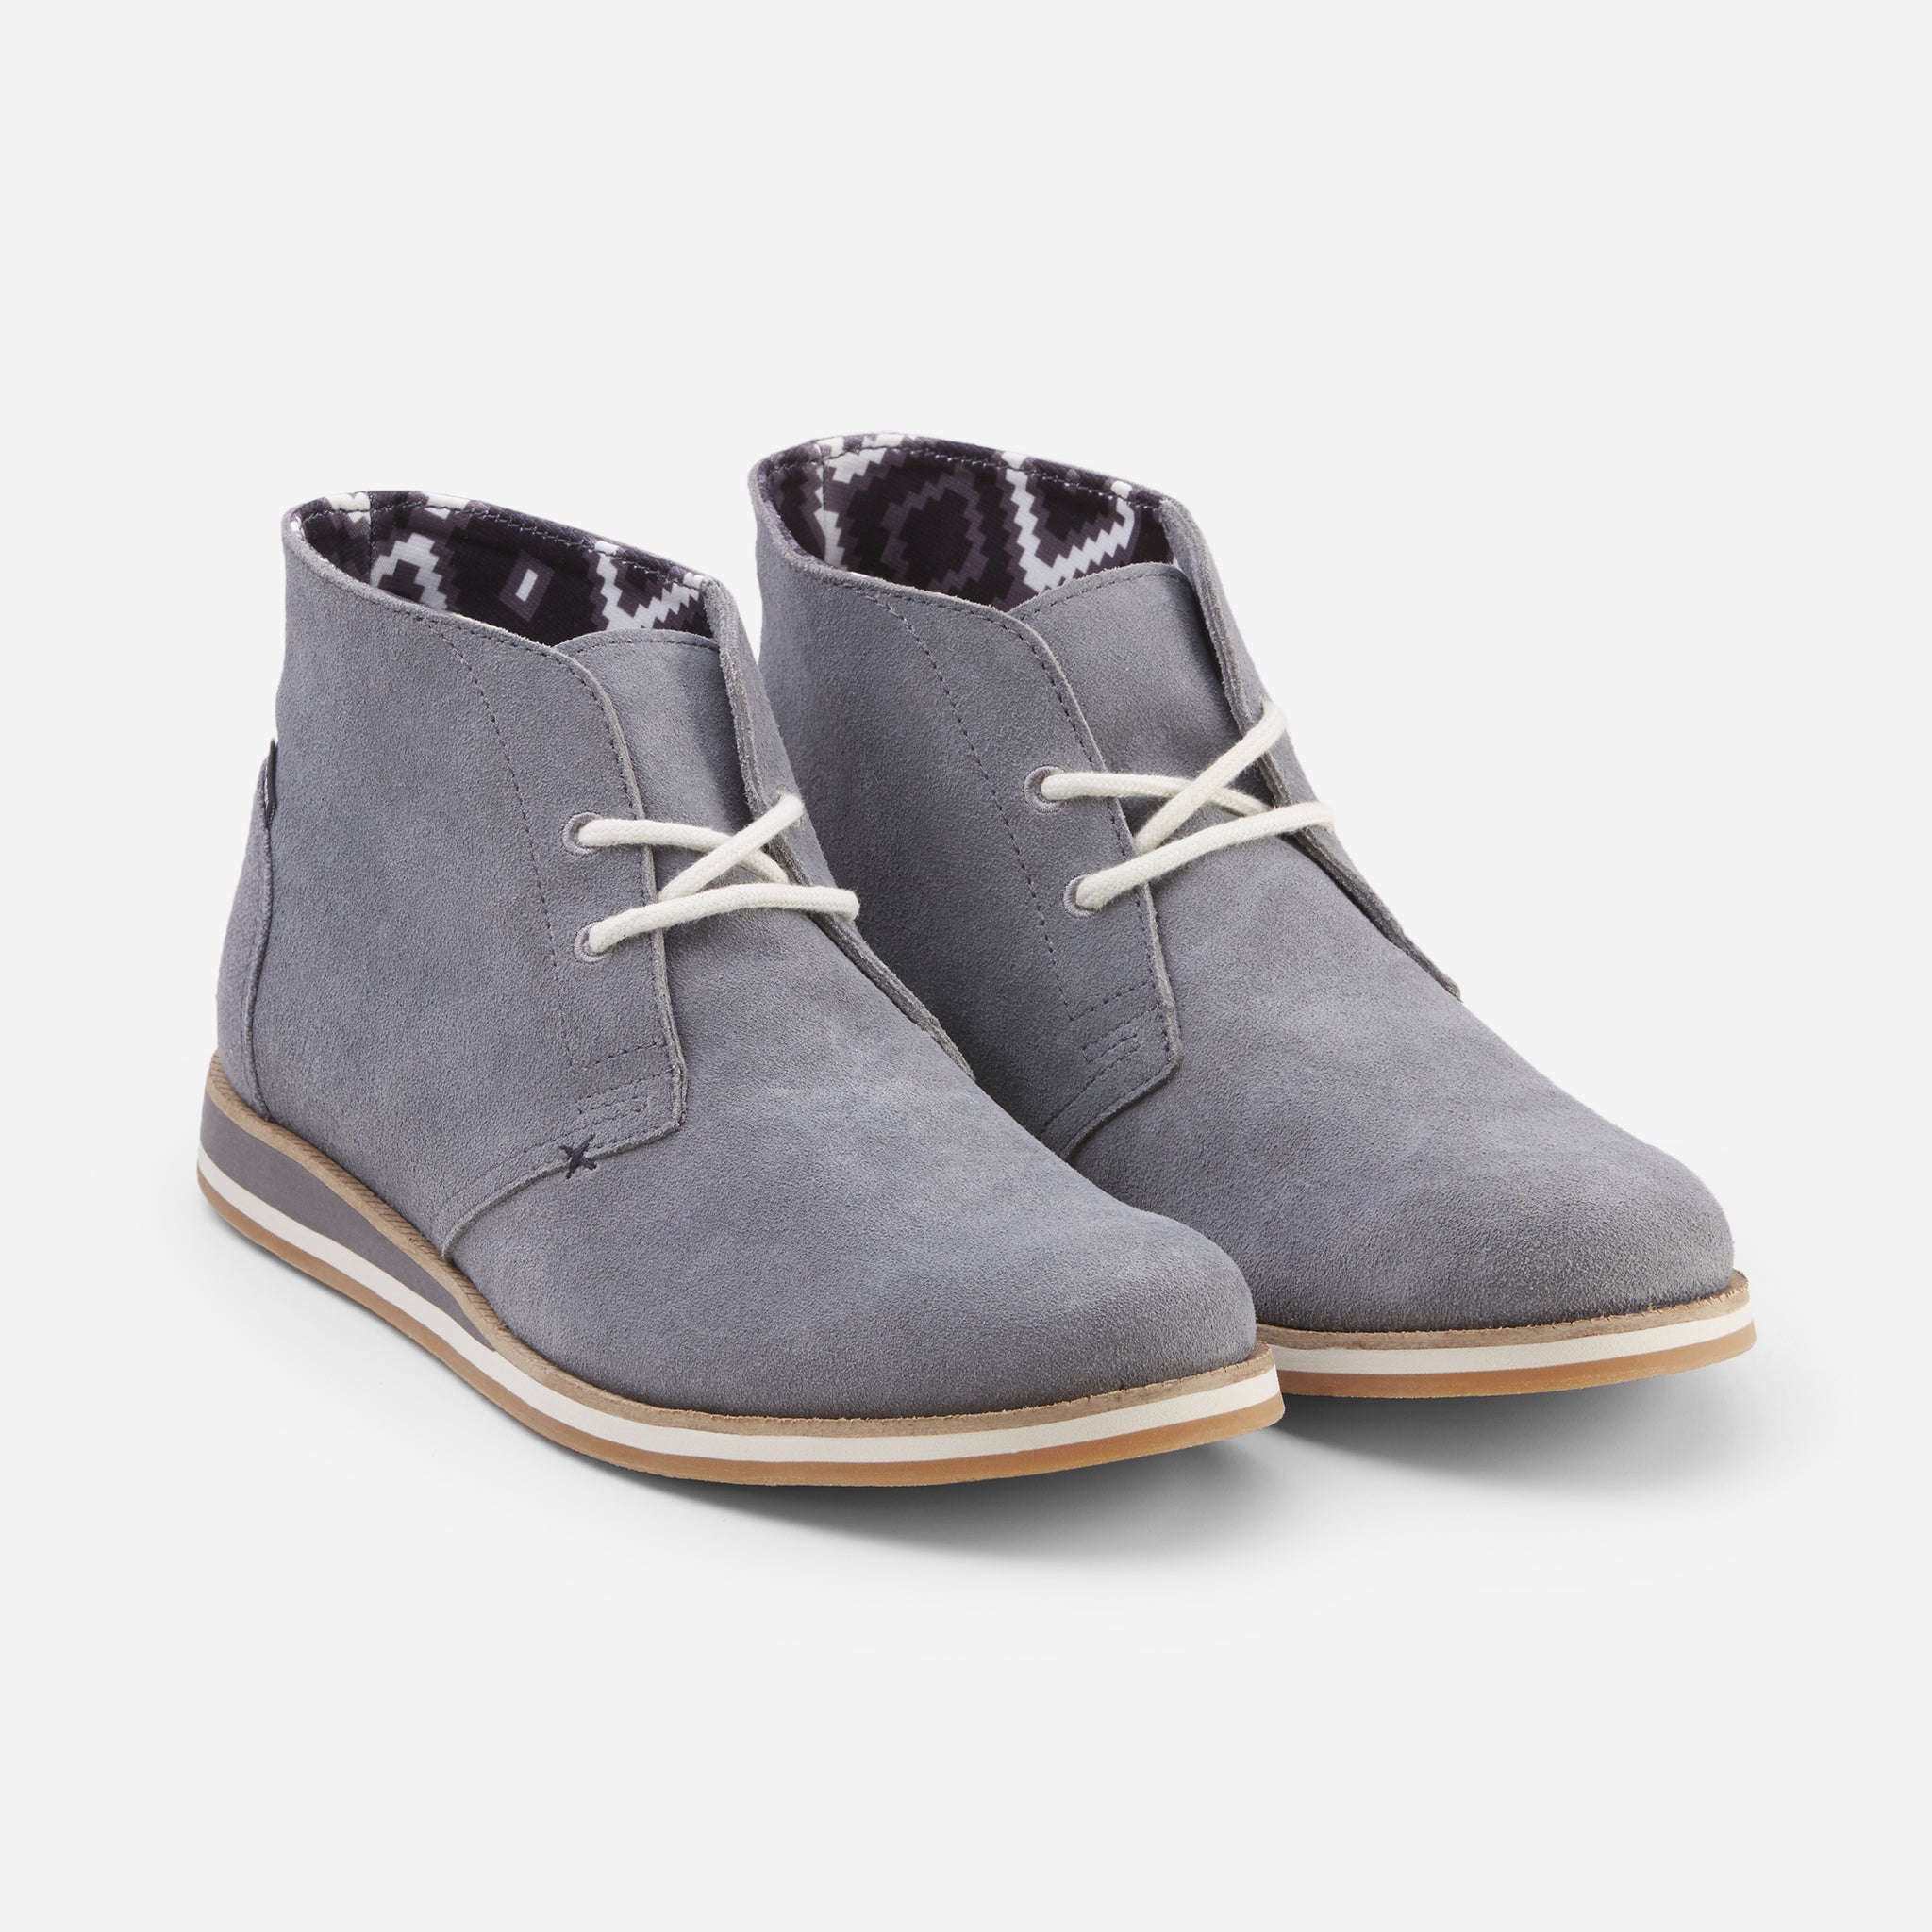 Adobe Desert Boot-Mens-Charcoal-Front View 